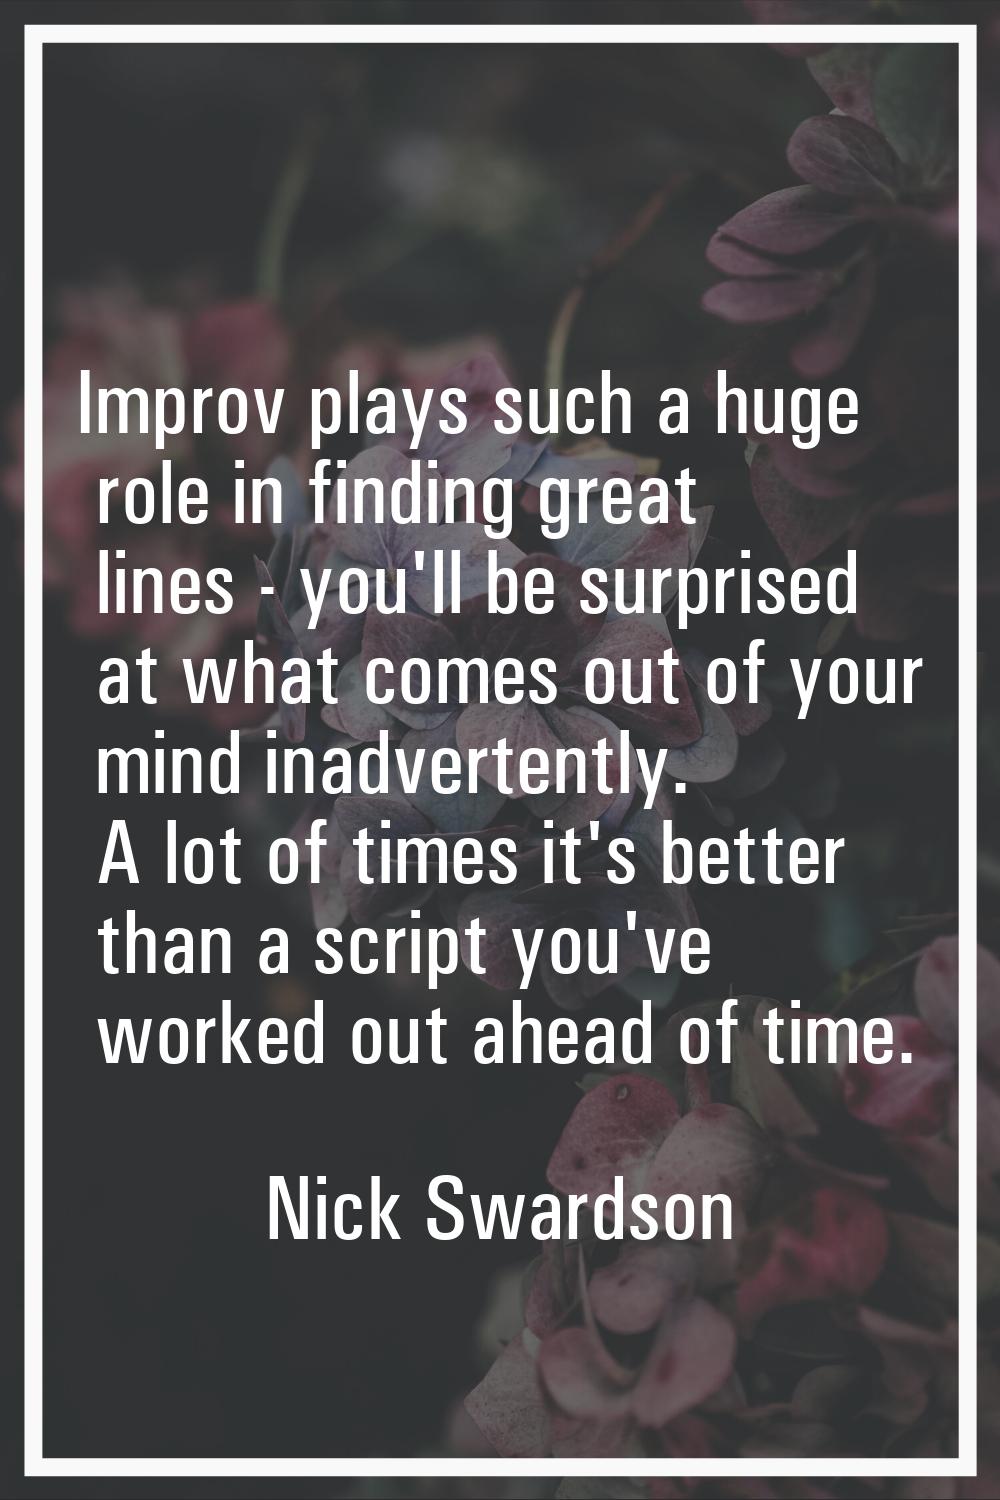 Improv plays such a huge role in finding great lines - you'll be surprised at what comes out of you